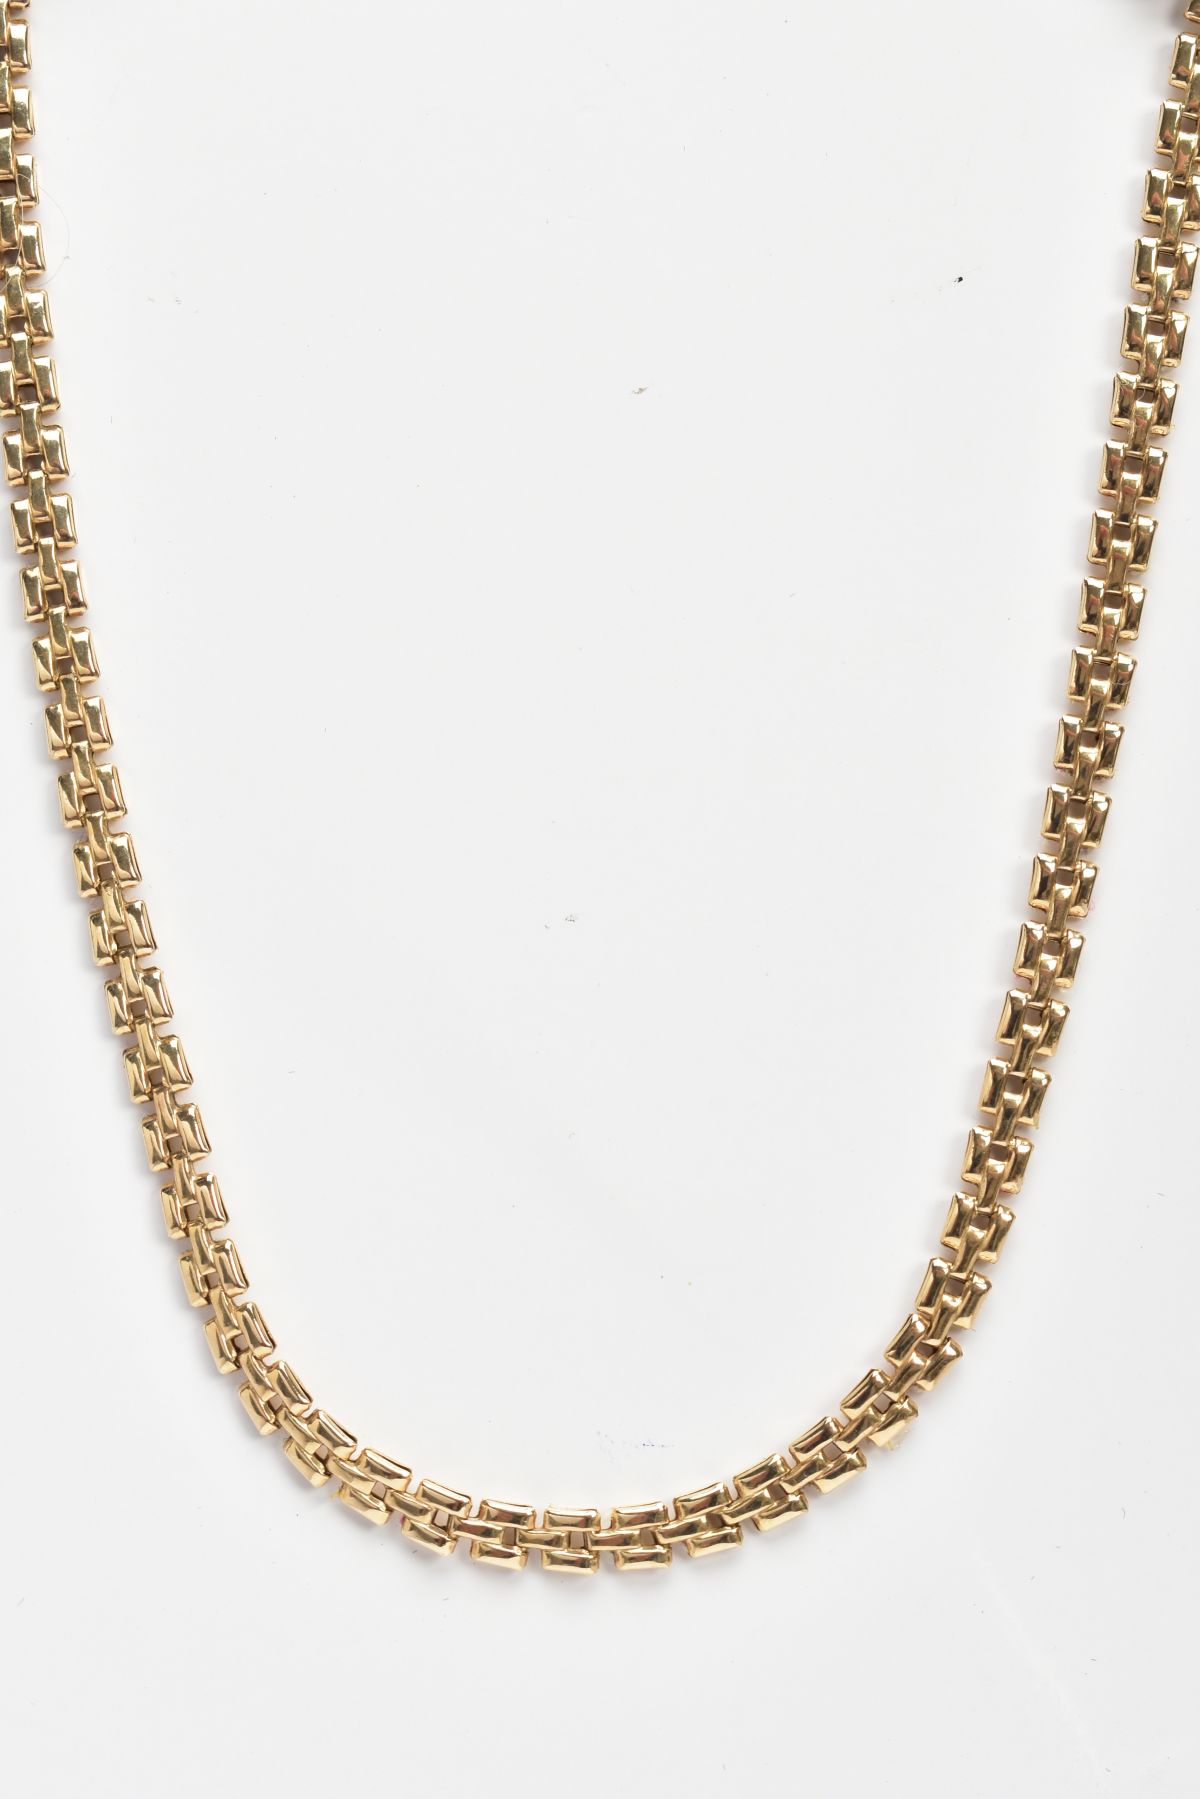 A 9CT GOLD BRICK LINK CHAIN, fitted with a lobster claw clasp, hallmarked 9ct gold Sheffield import, - Image 2 of 3